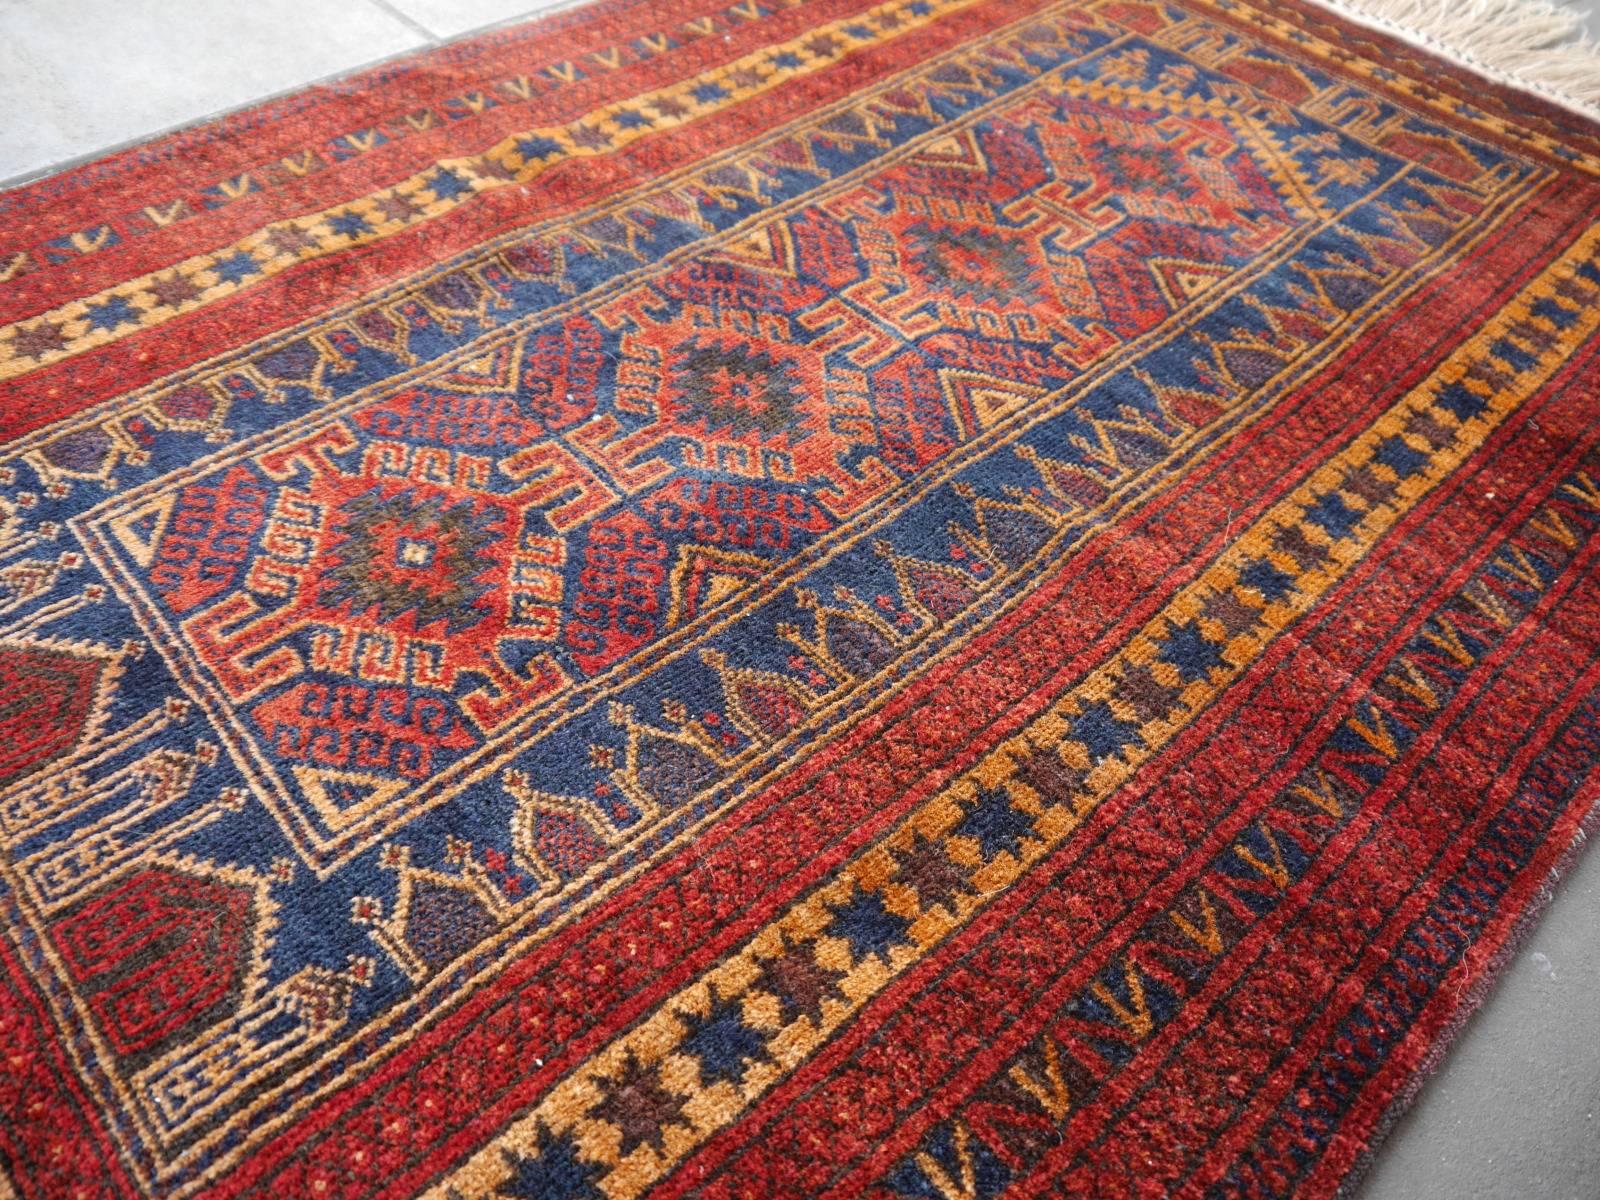 Vintage Balouch Tribal Prayer Rug Blue and Rust Color 4